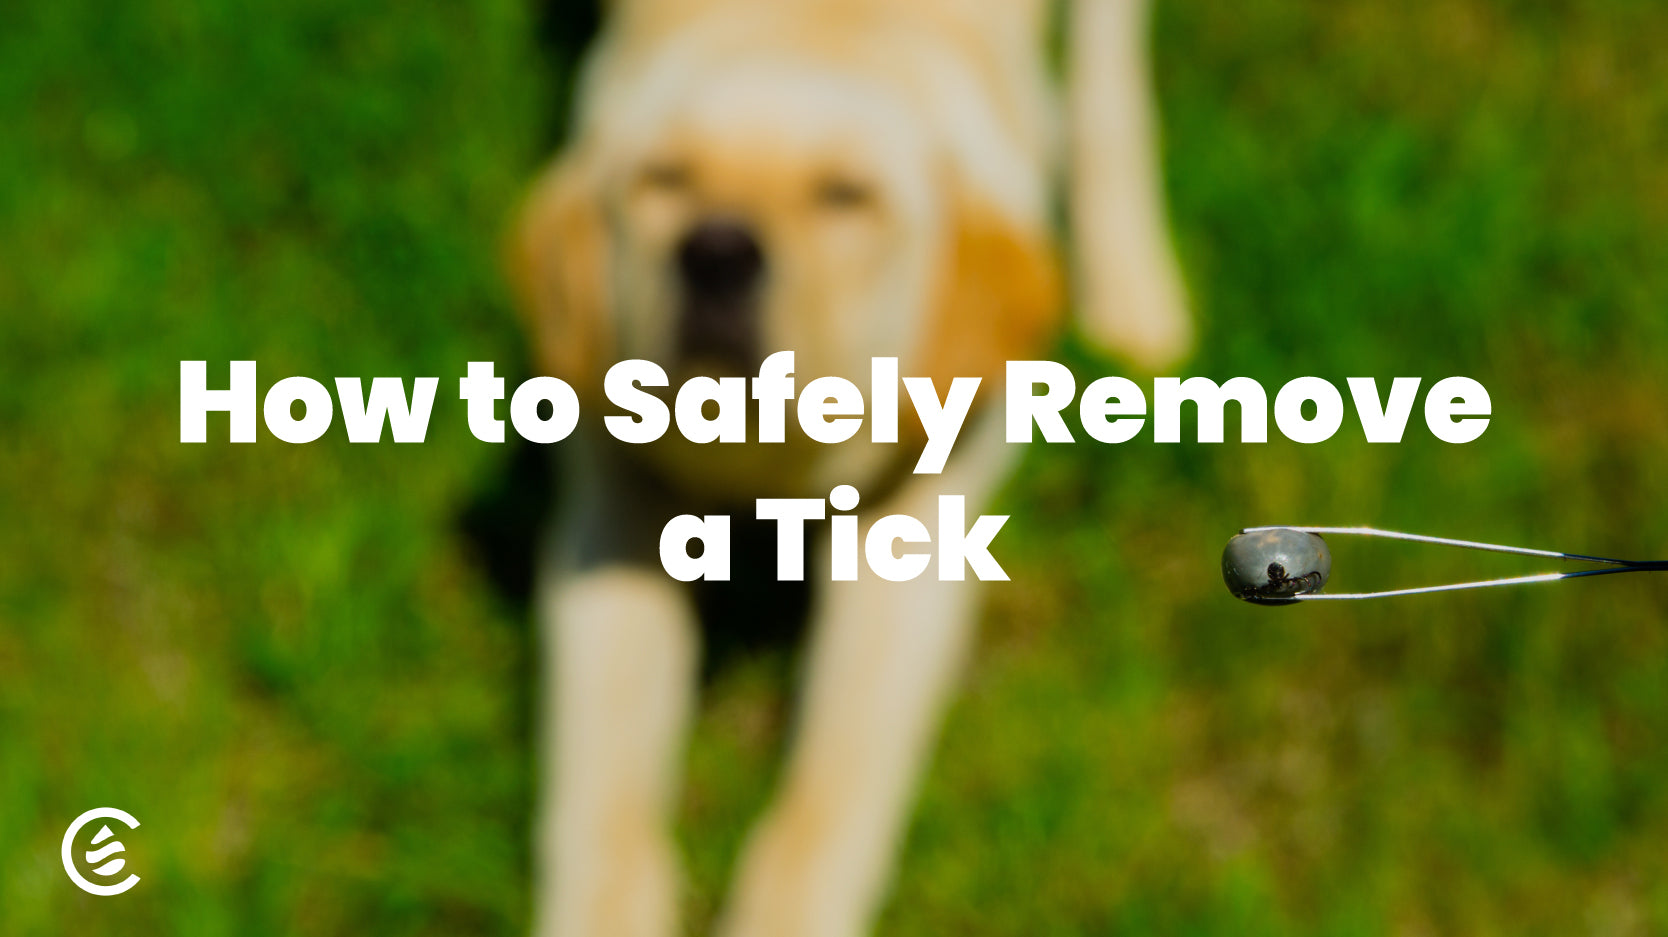 Cedarcide Blog Post Image, How to Safely Remove a Tick